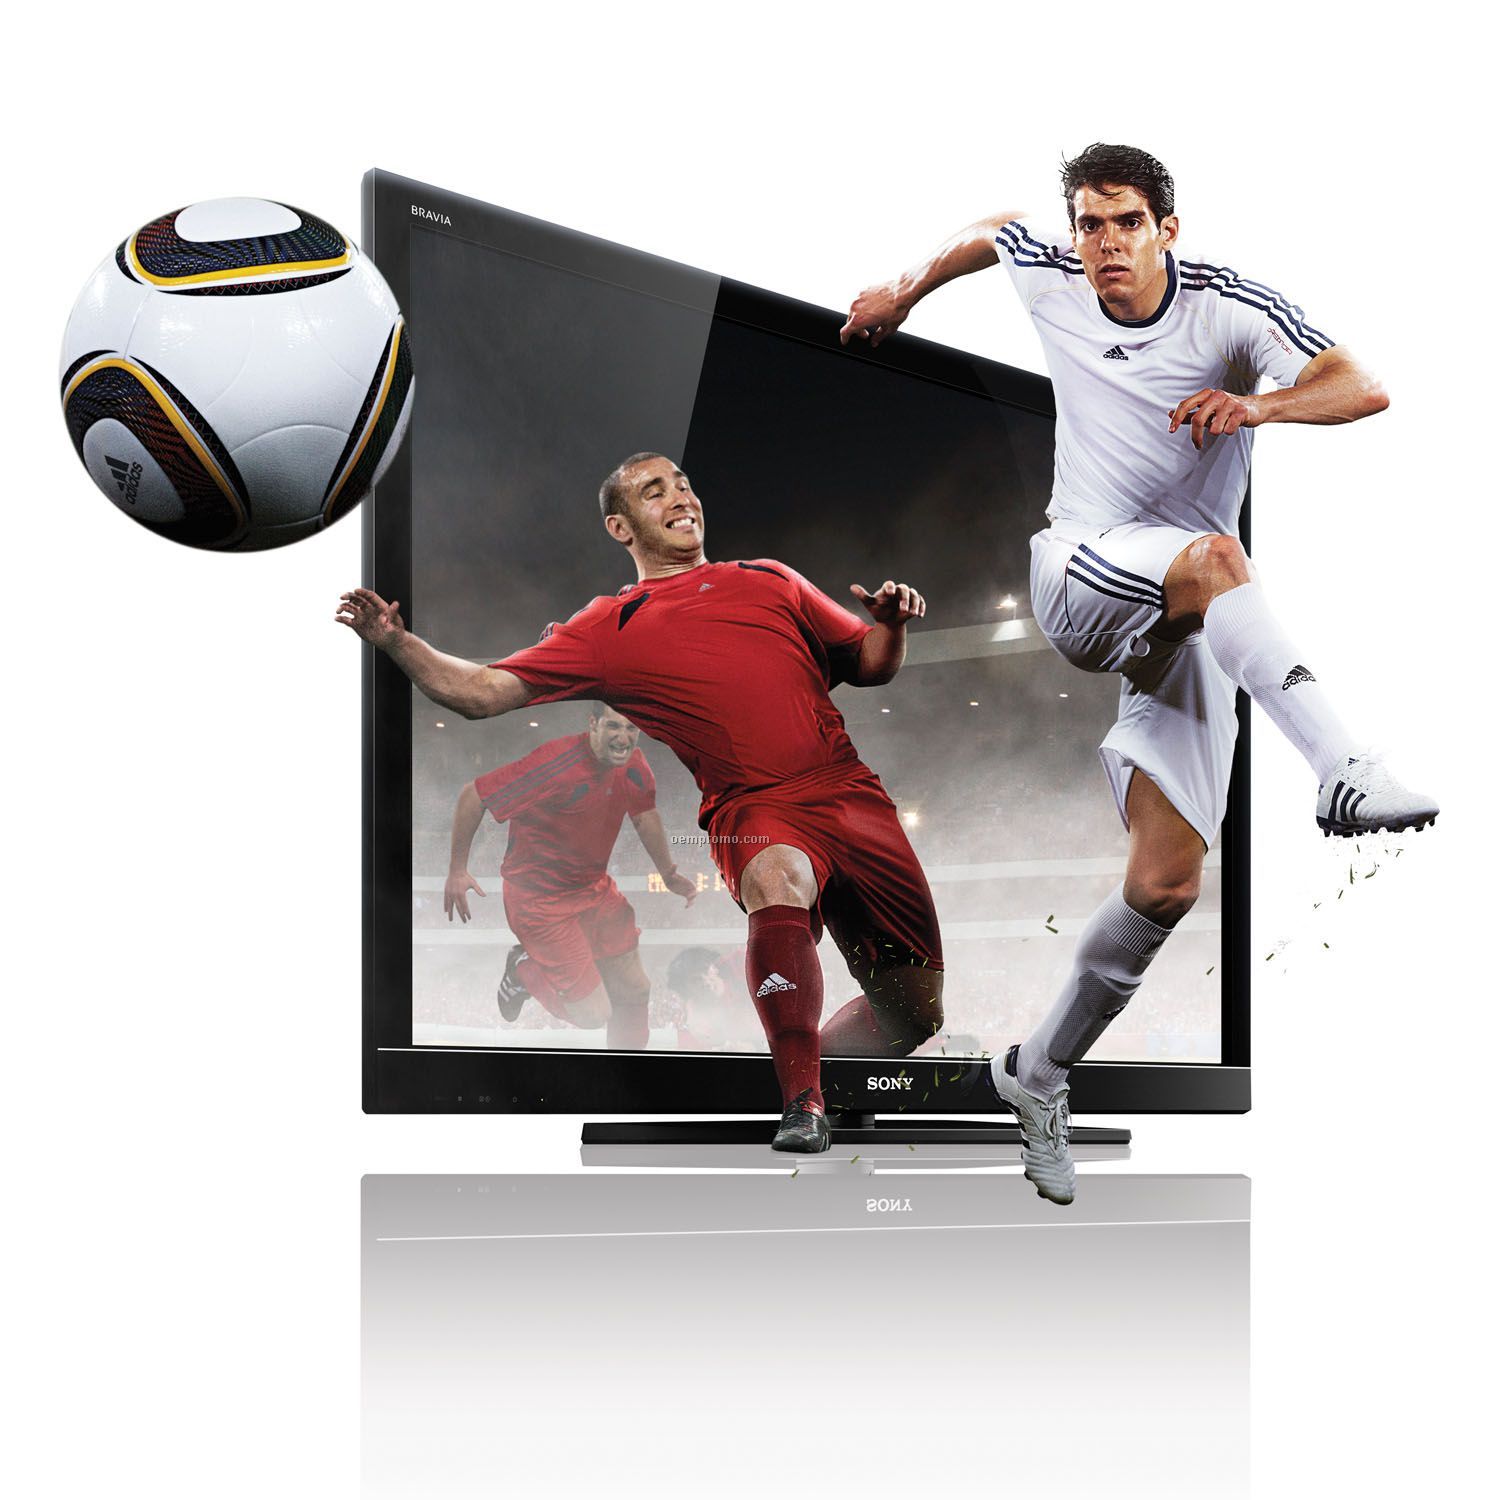 SONY LCD-LED TV LOWEST PRICE IN BD 01611646464 large image 0